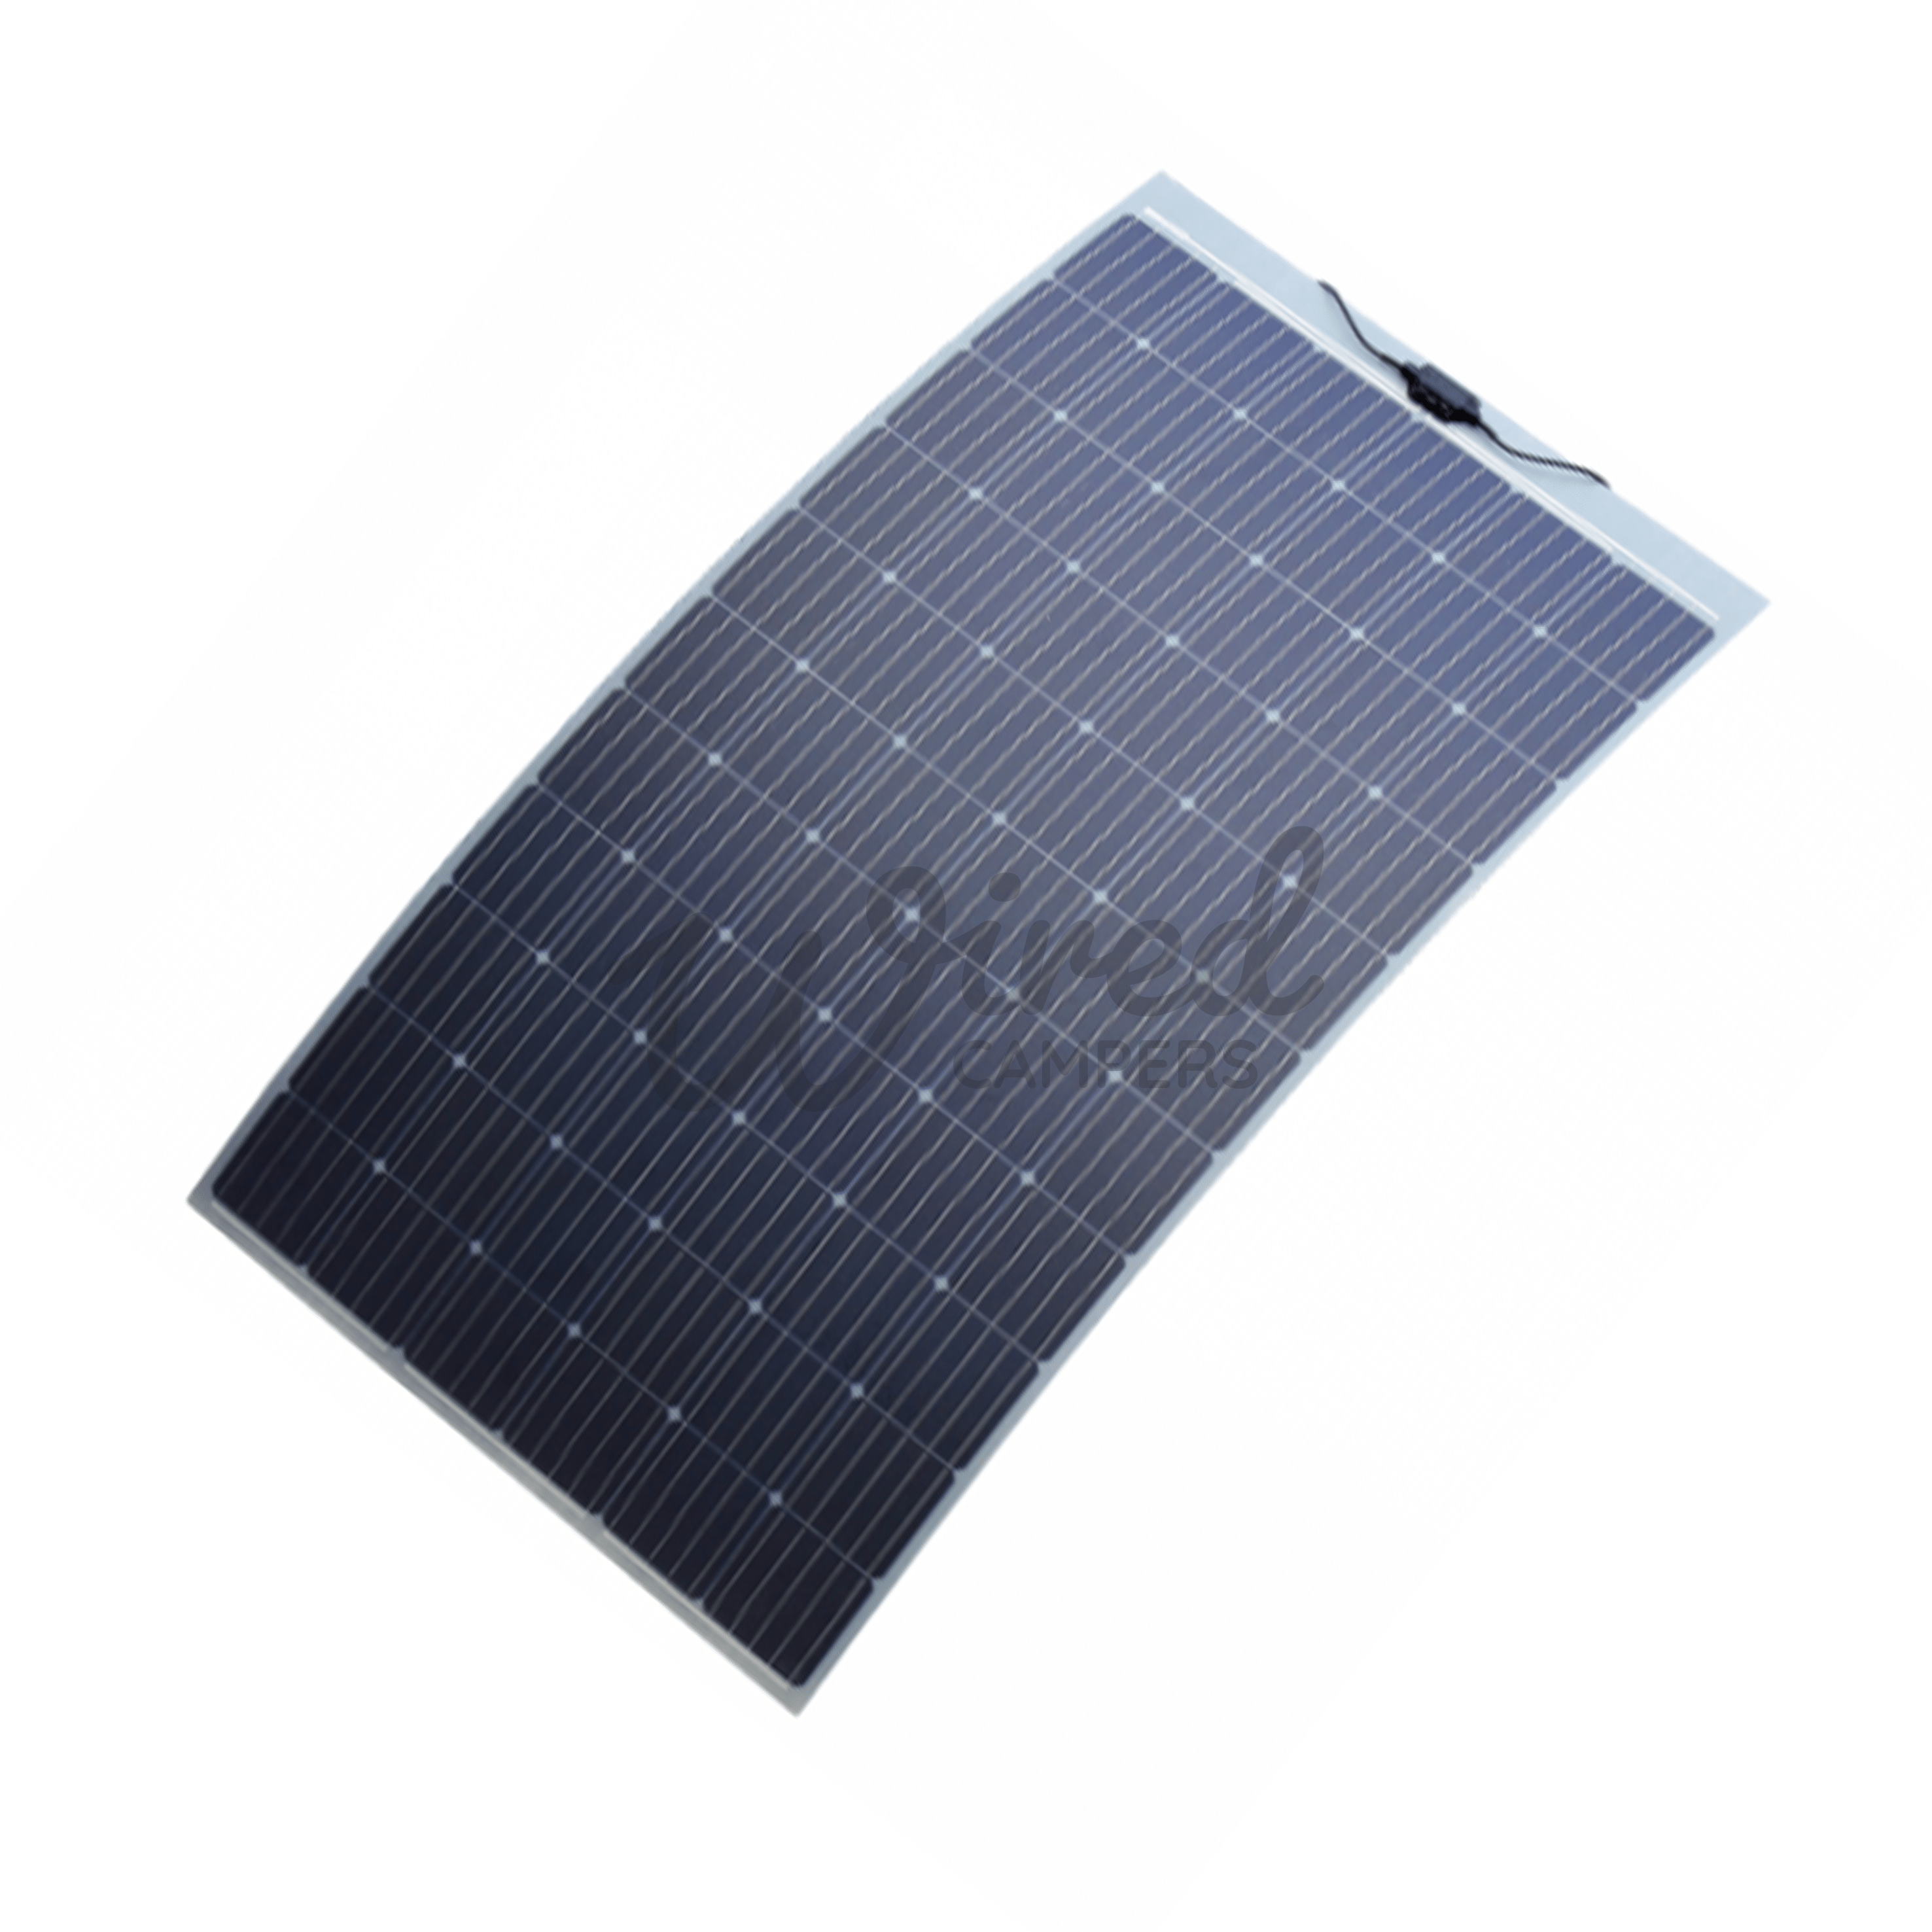 Wired Campers Limited 330W Mono Semi-Flexible Fibreglass Large Camper Van Solar Panel